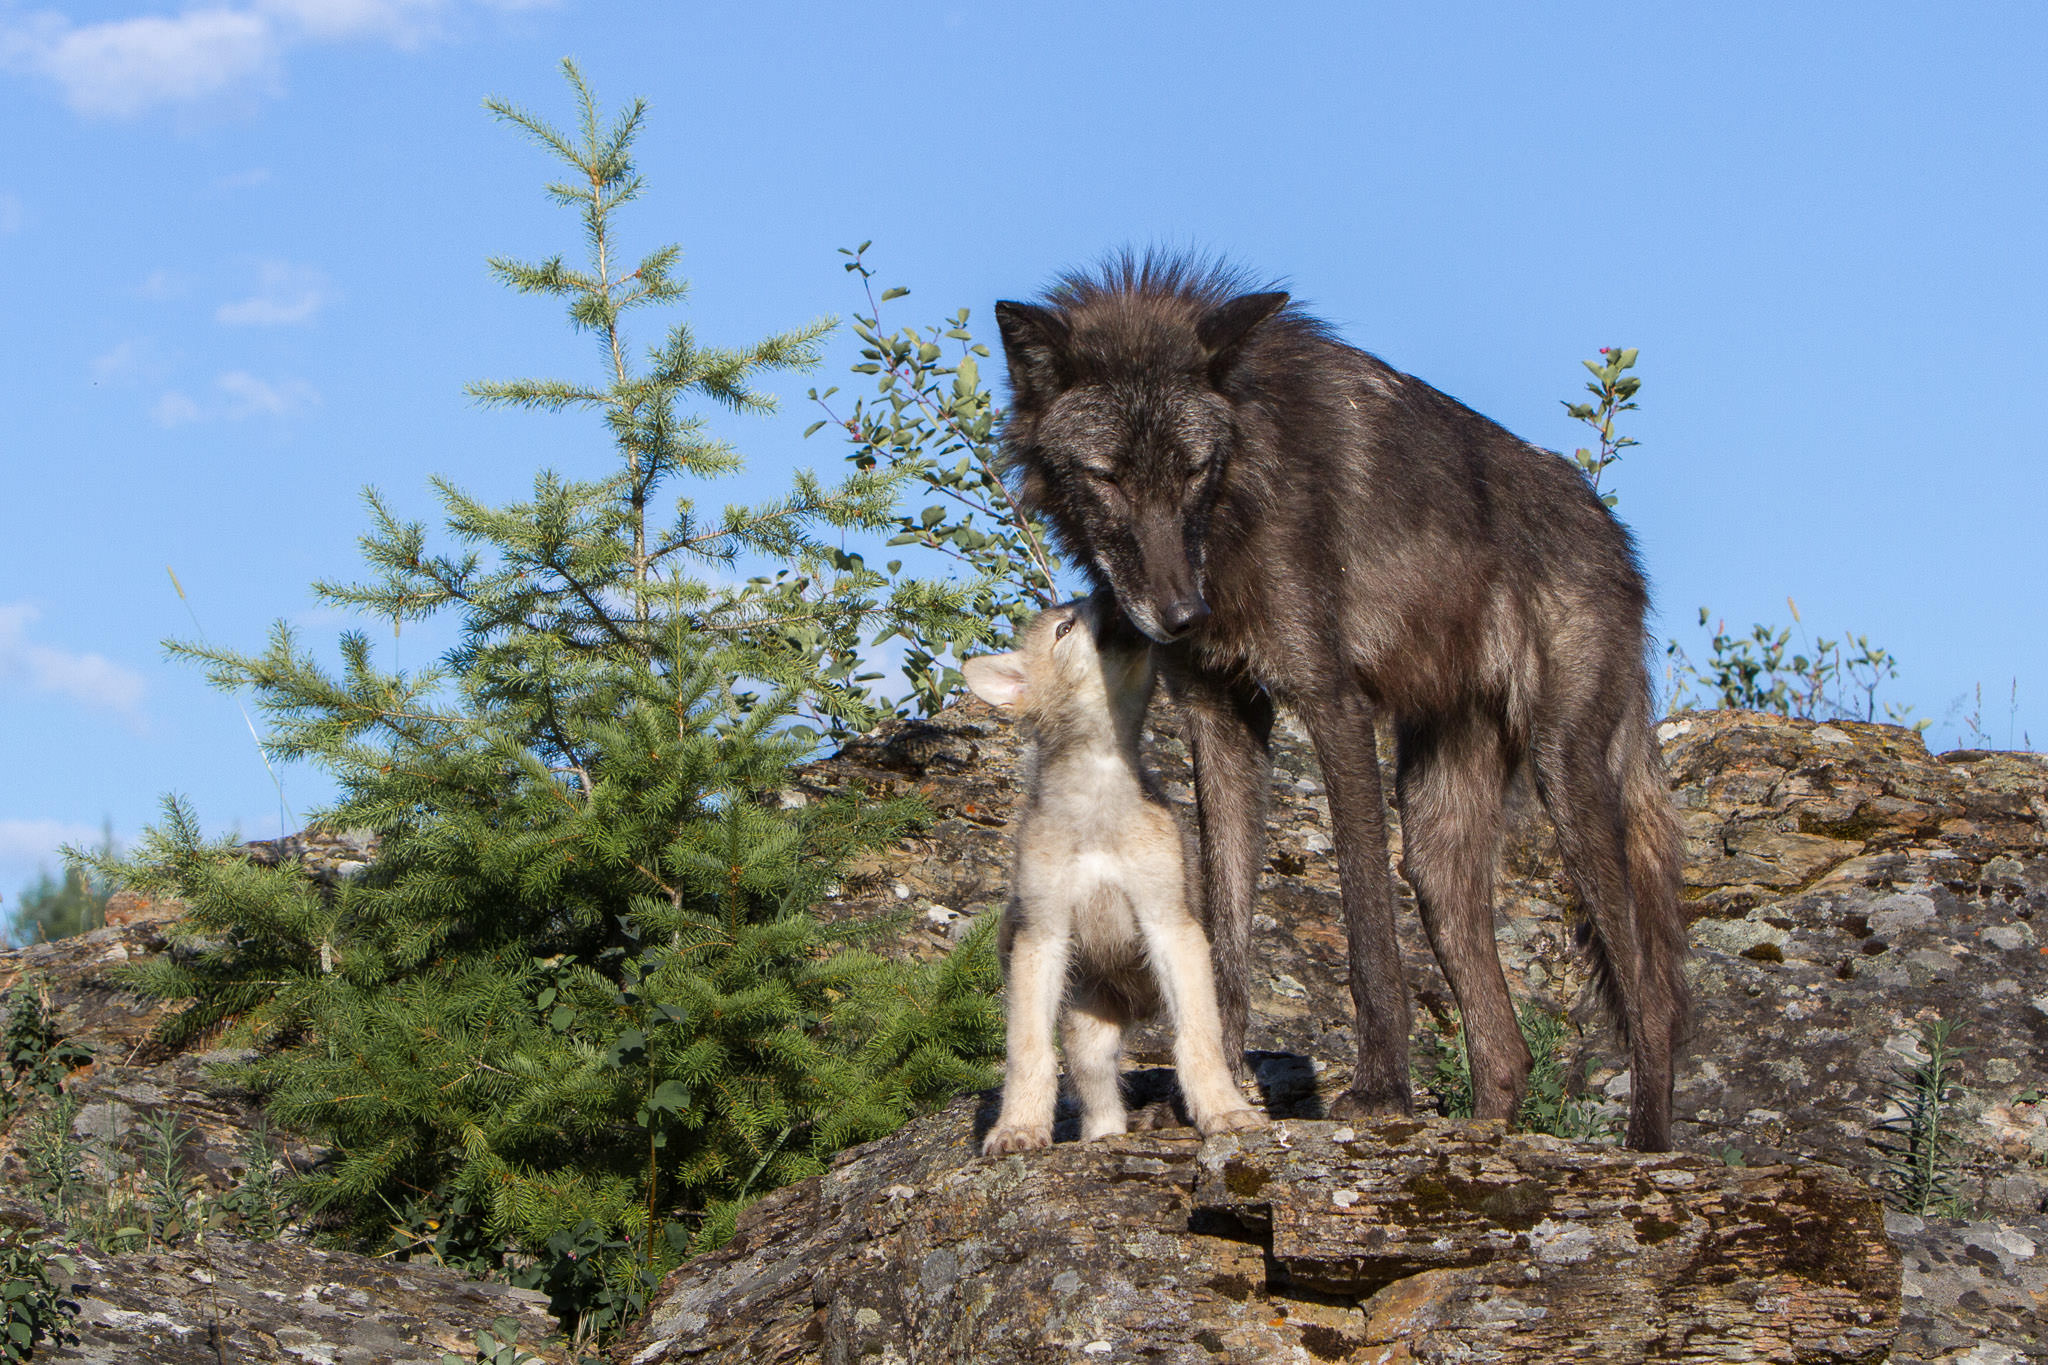  Wolf and pup  Western Montana  #20130707_0435 